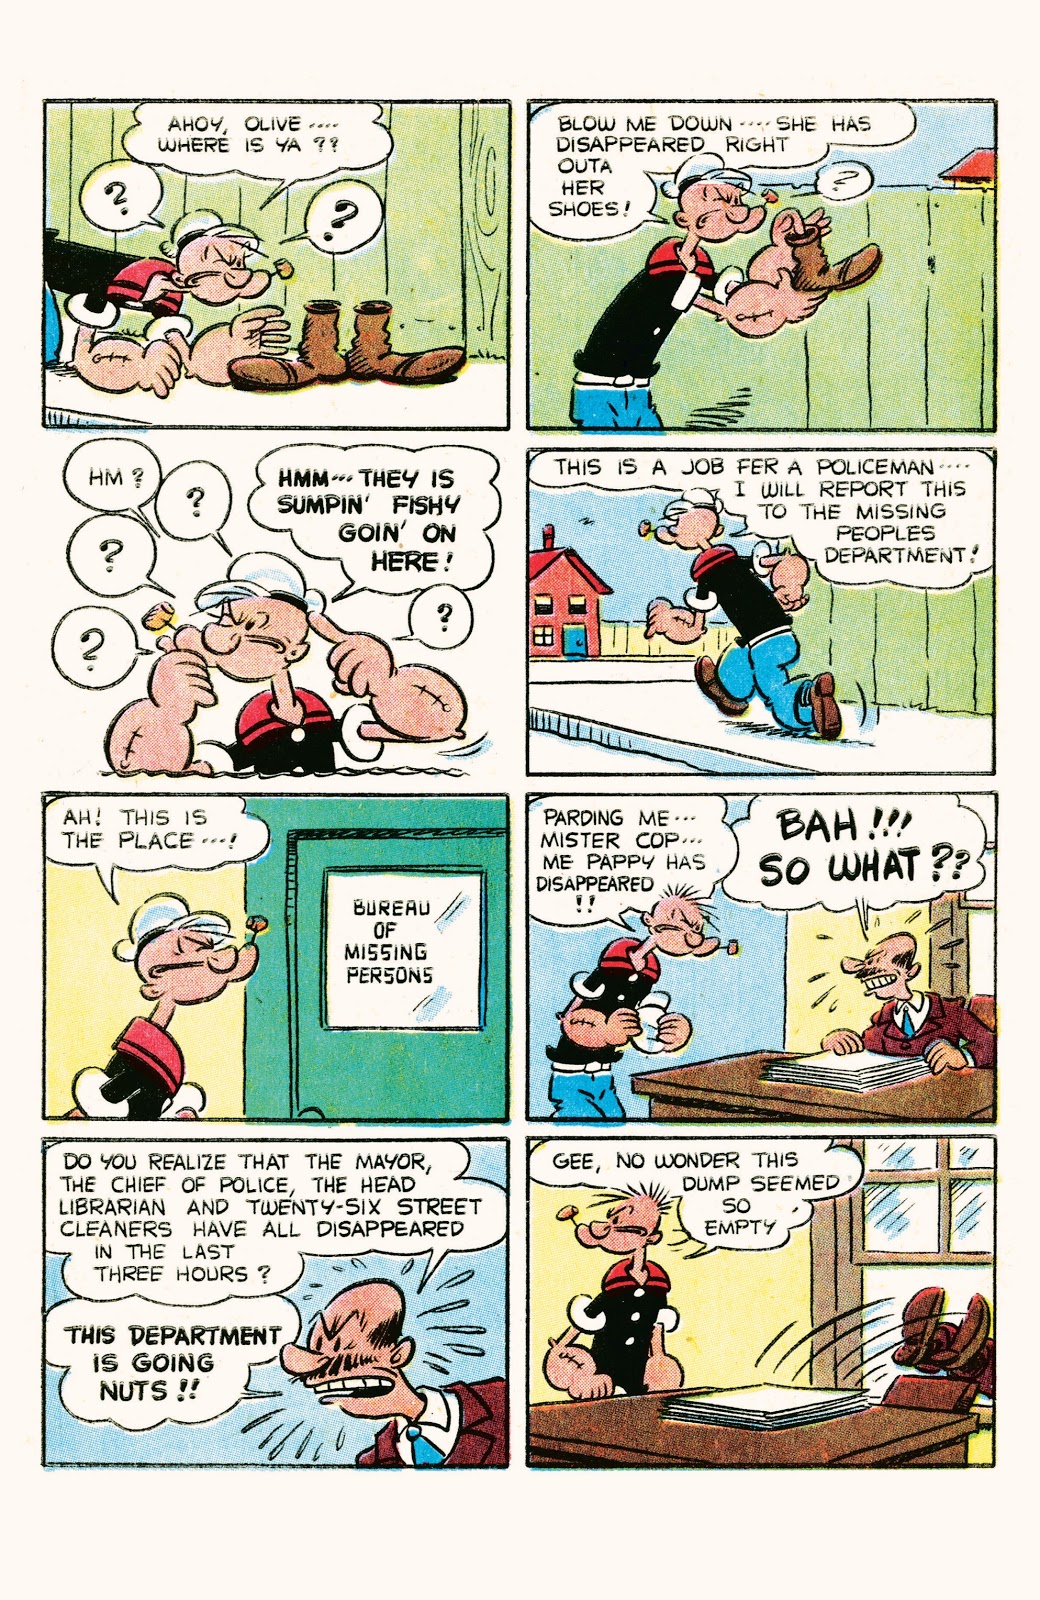 Popeye the Great ComicBook Tales by Bid Sagendorf review